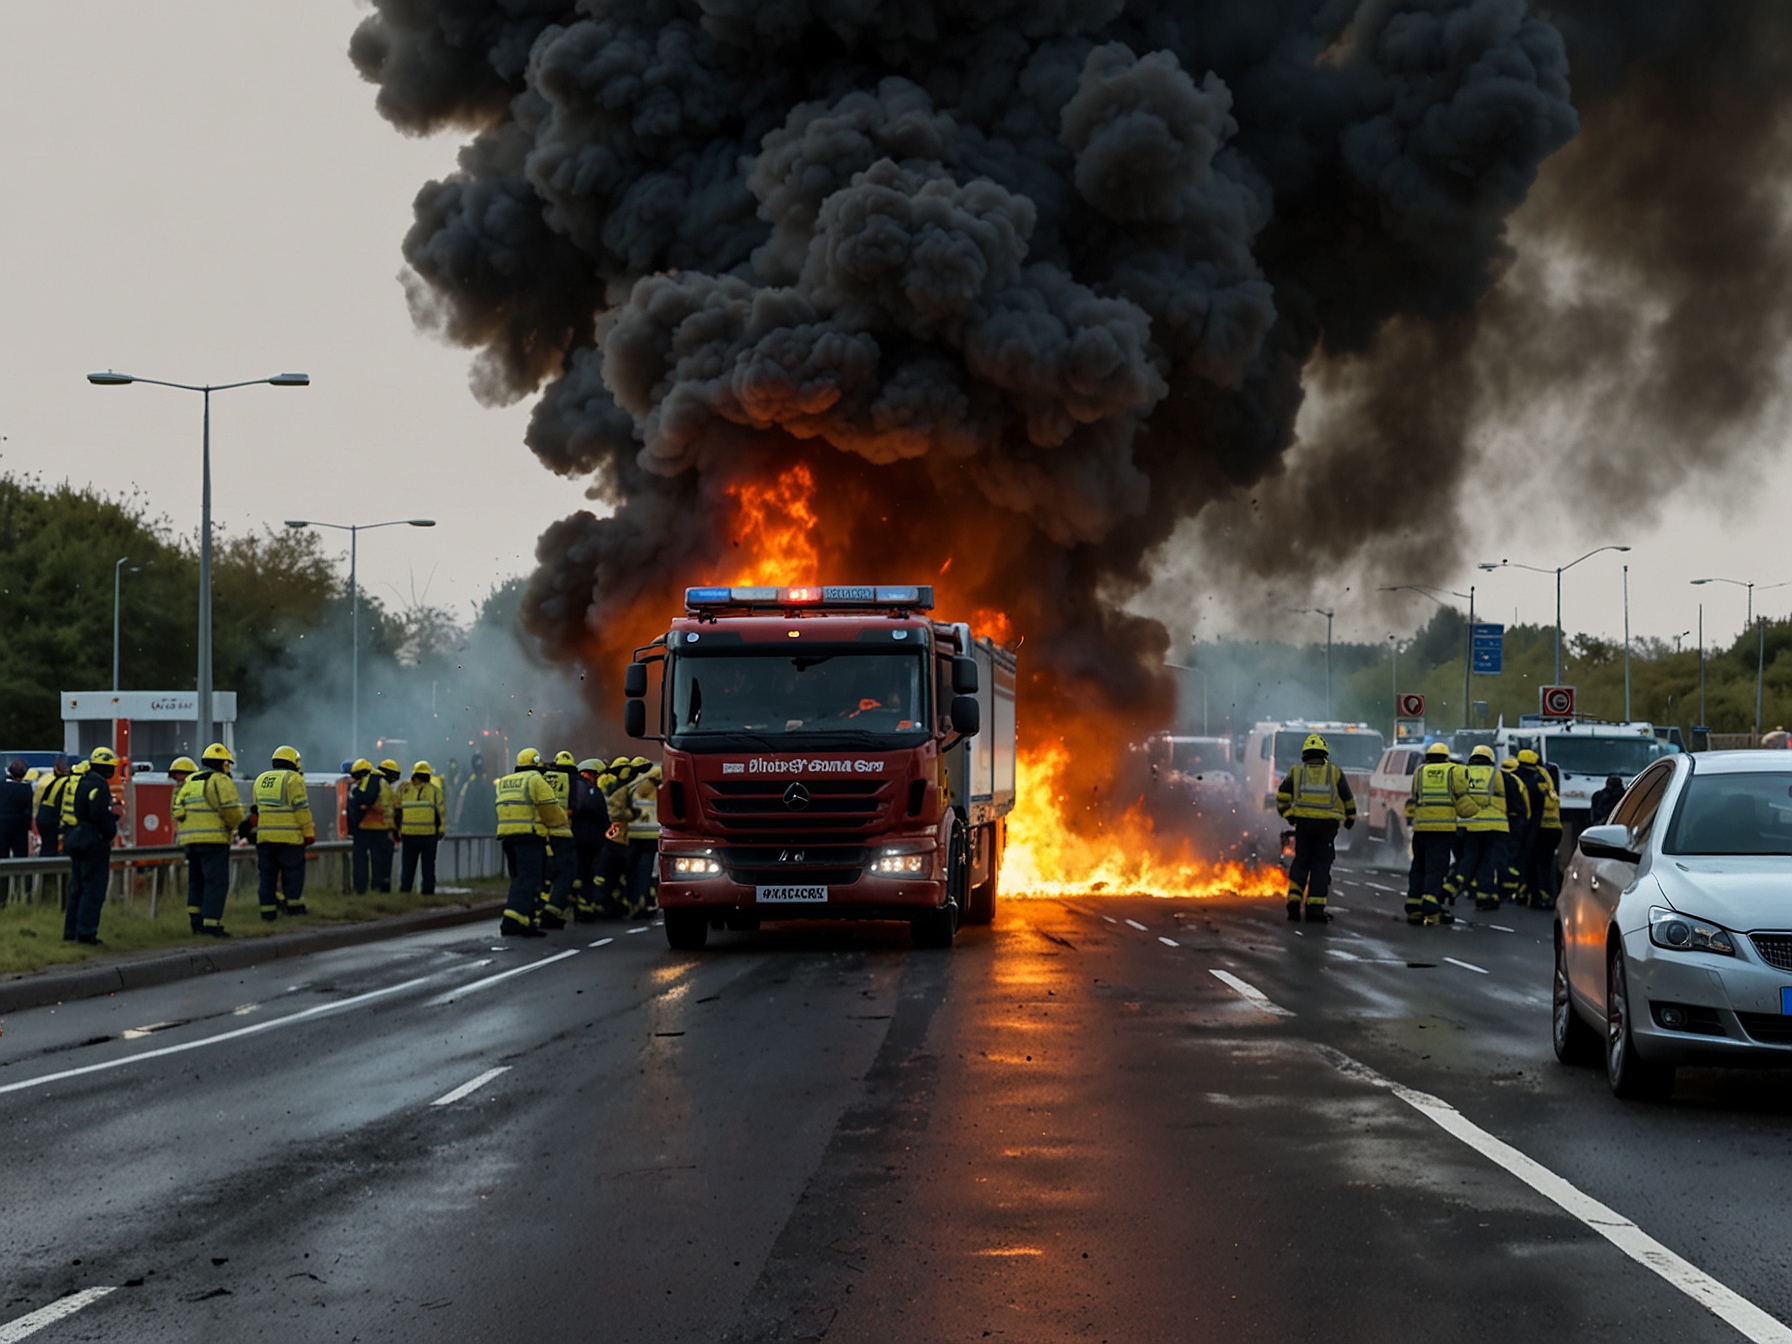 Emergency services respond to a vehicle fire on the M57, with firefighters working to extinguish the flames. Smoke and blocked lanes are evident as traffic comes to a standstill.